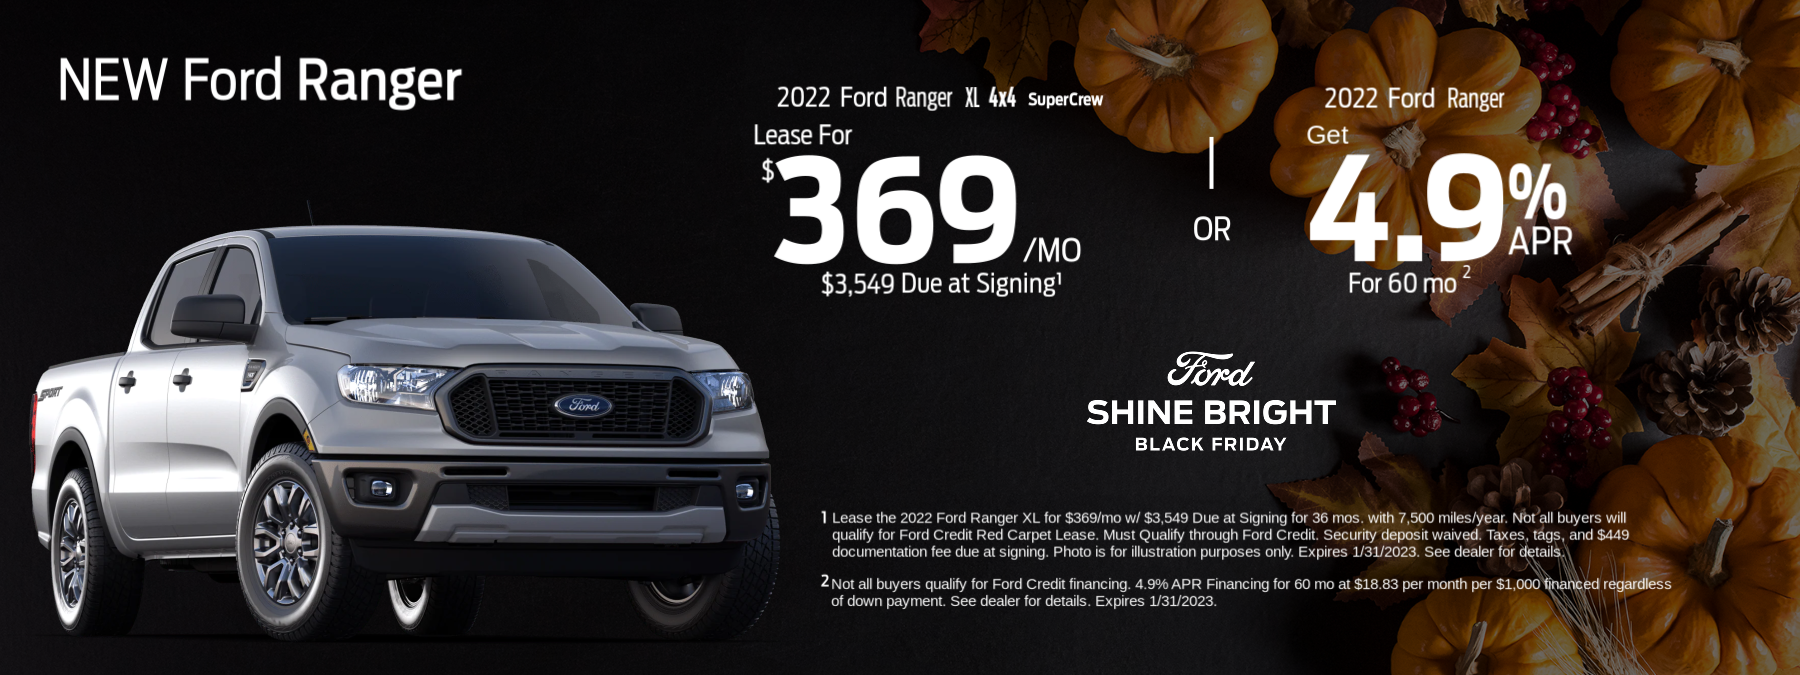 Check out new Ford Ranger offers!